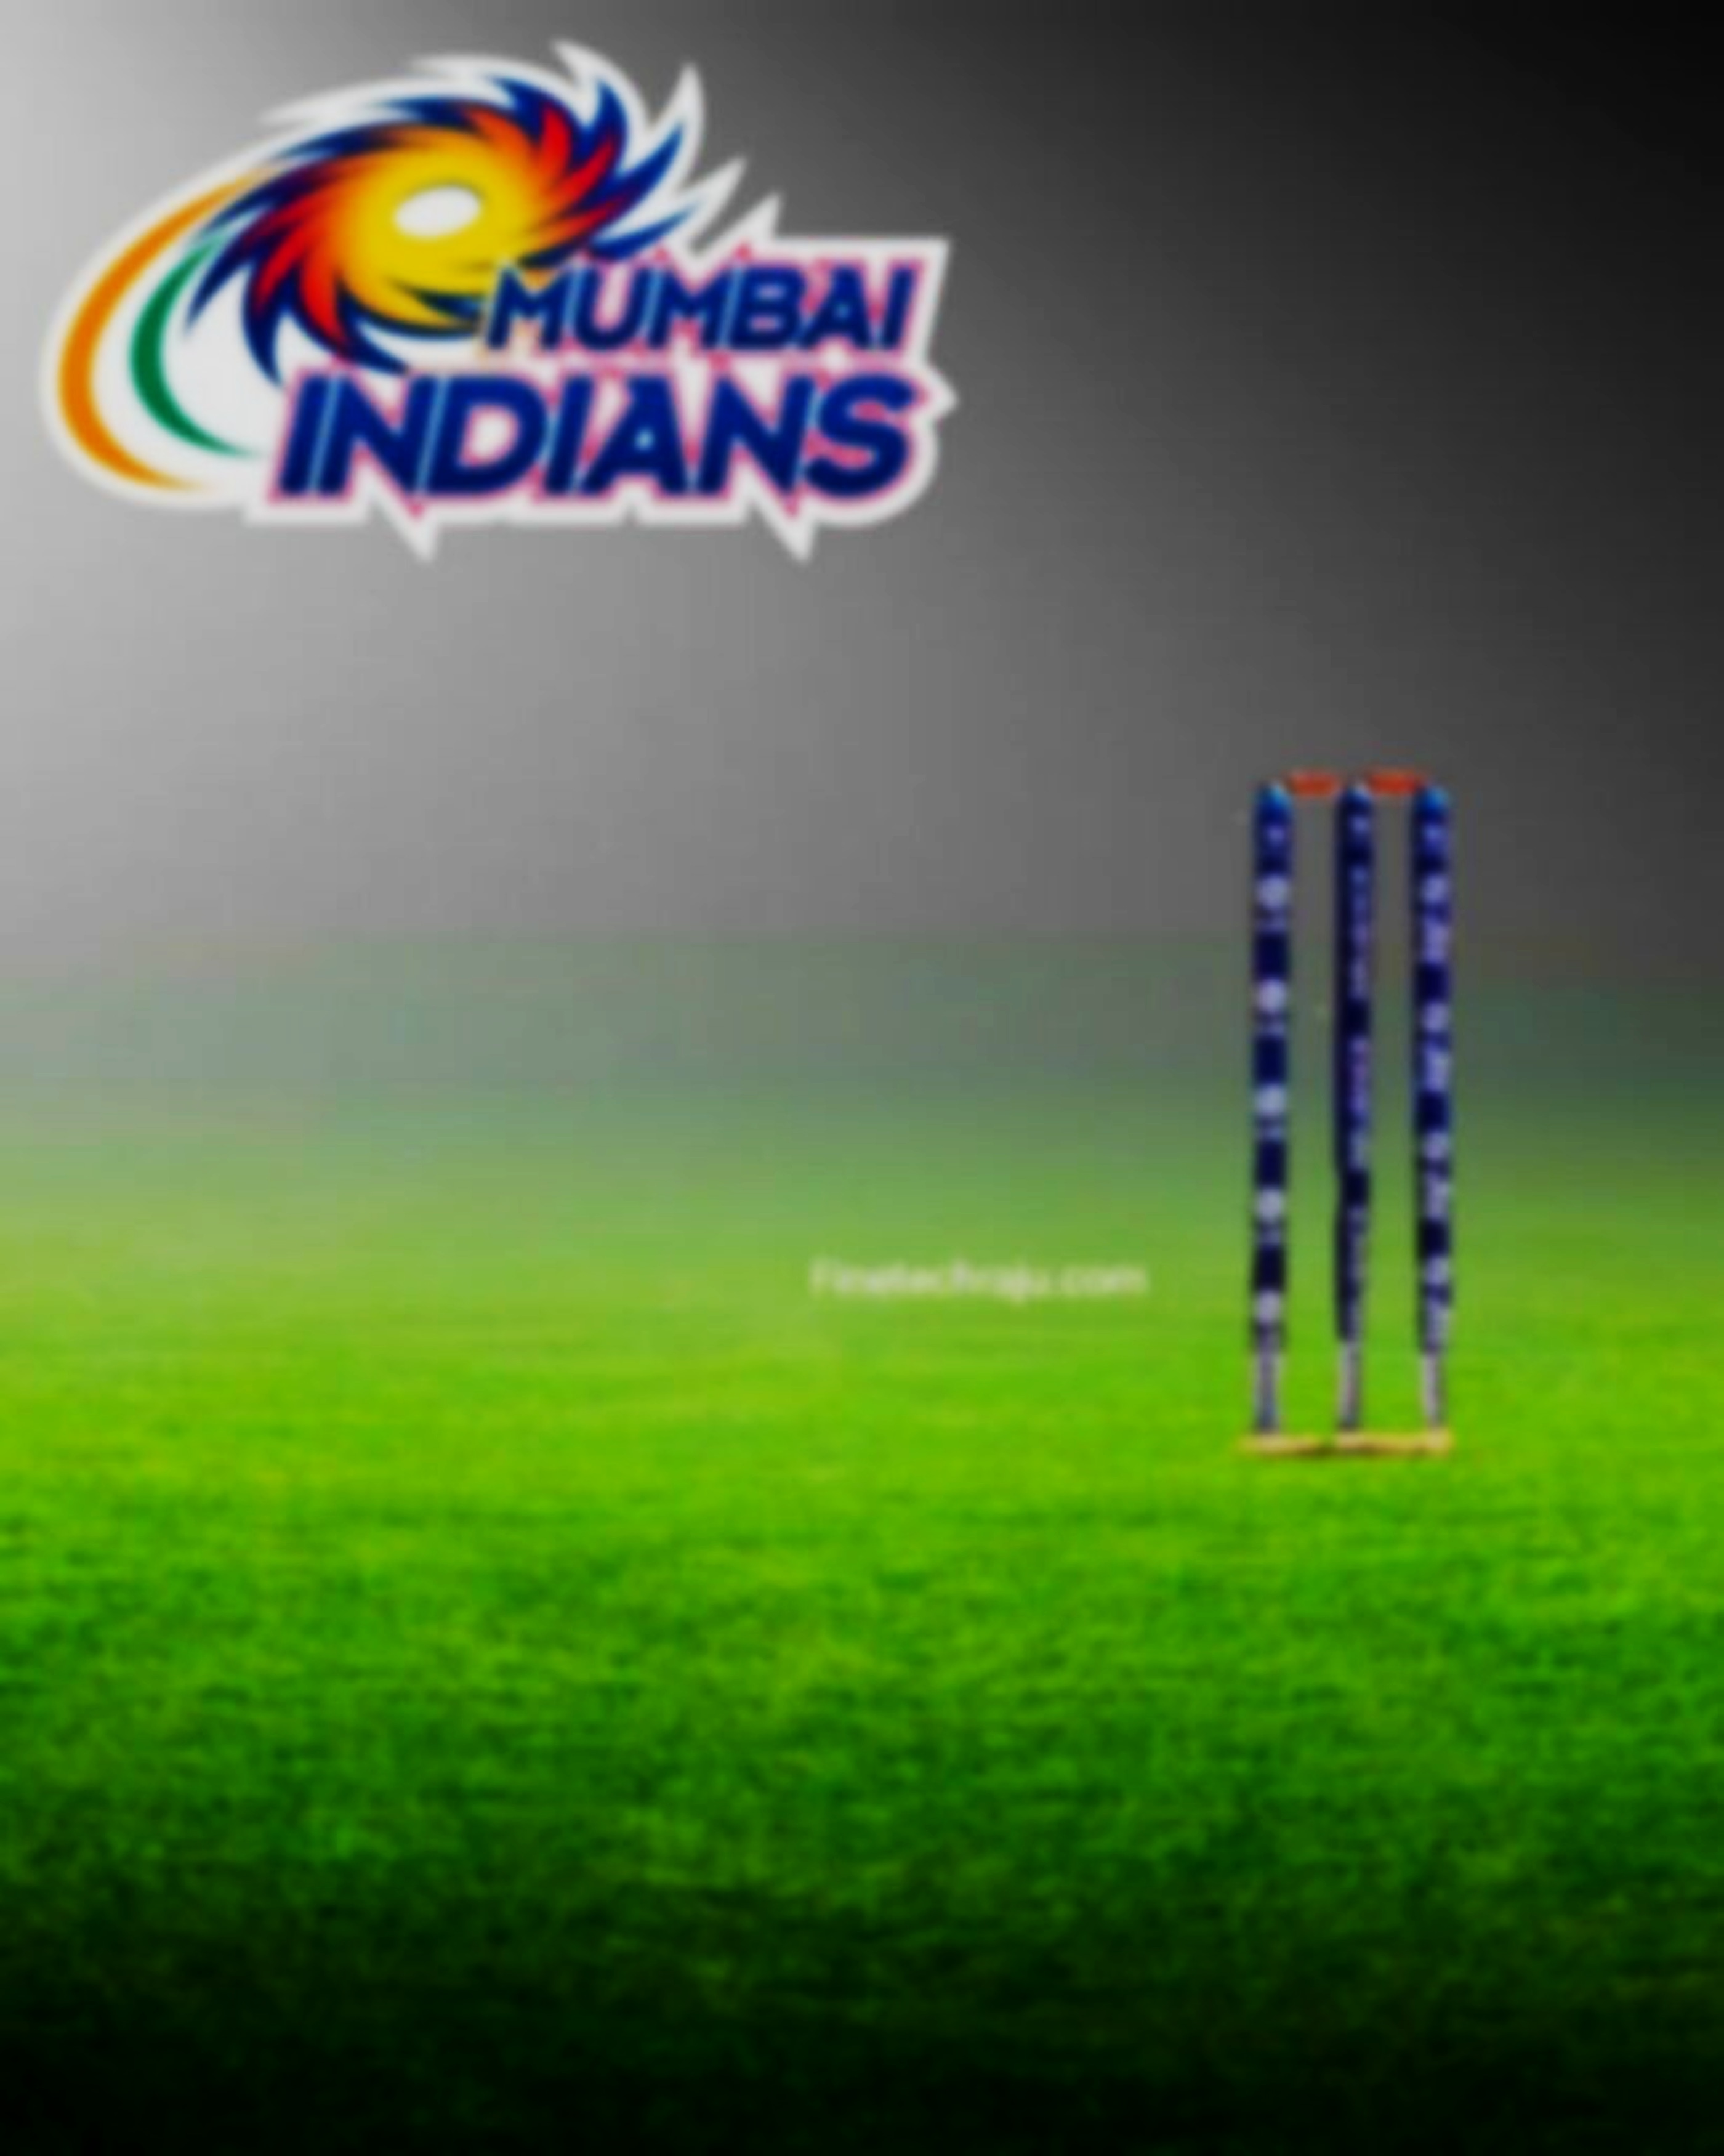 You are currently viewing Mmbai indians ipl image editing background download free